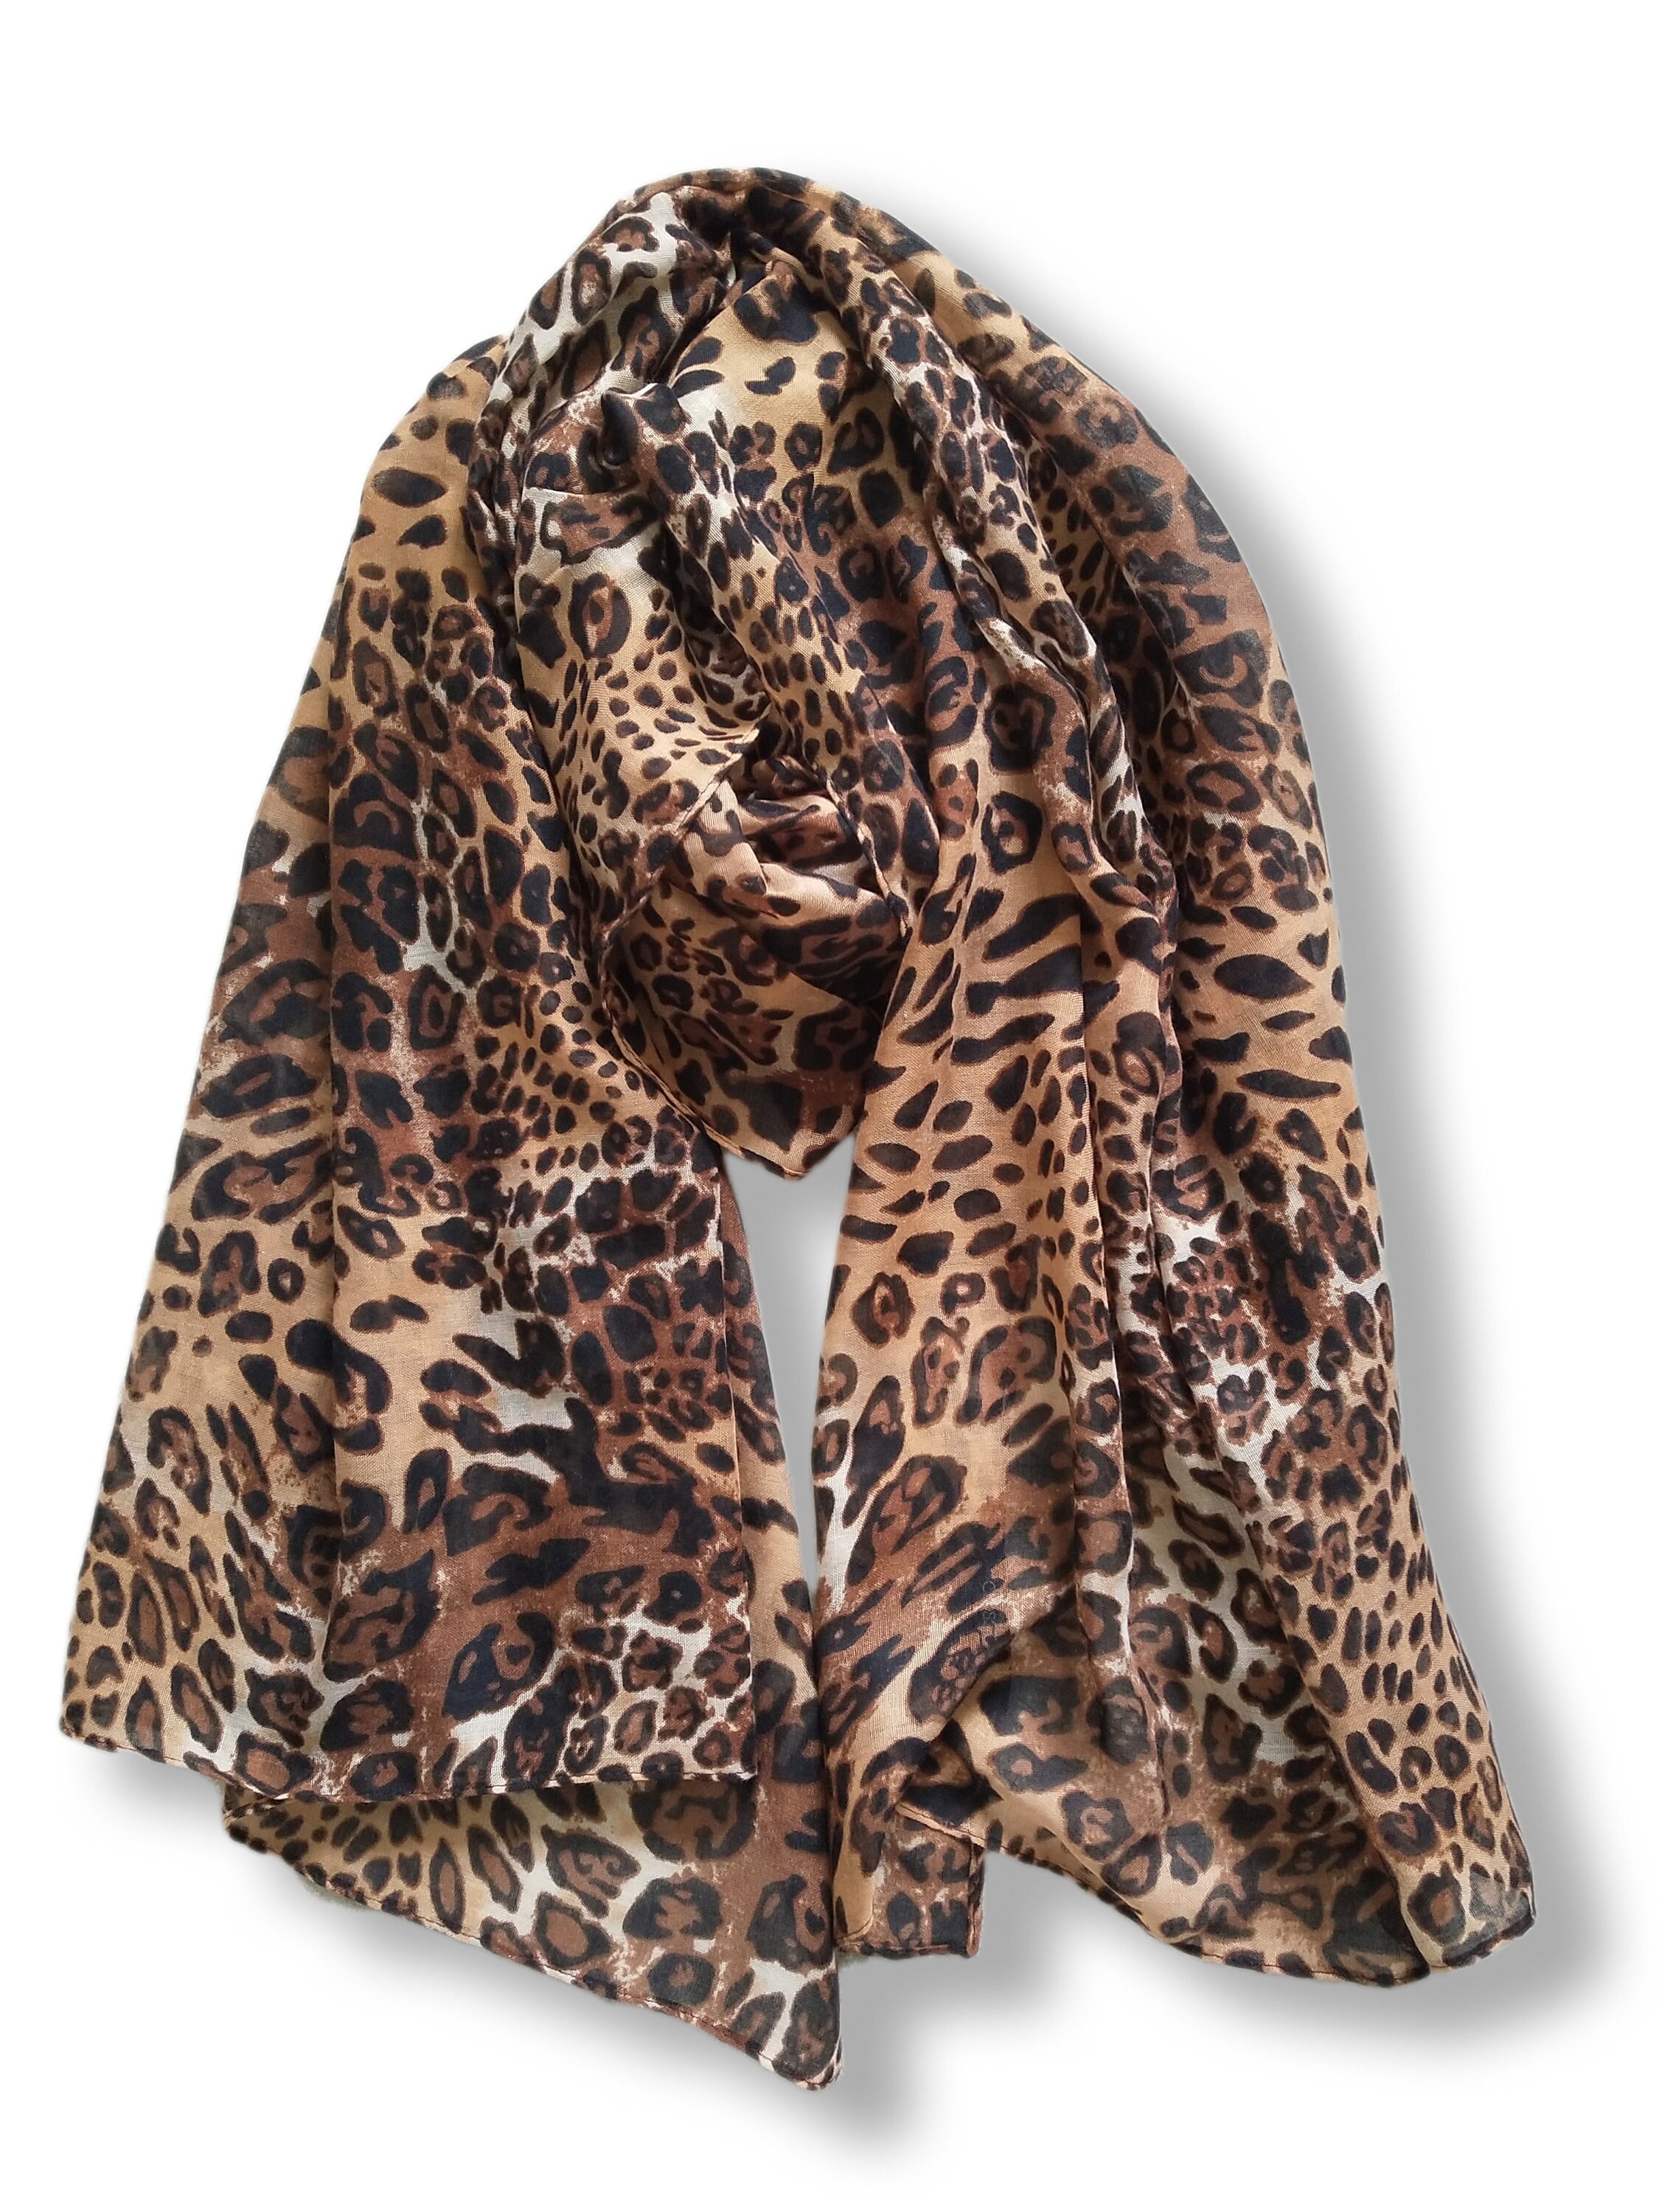 Fashion classic Brown Leopard Print Scarf, large size chiffon scarf,  ($21) ❤ liked on Polyvore